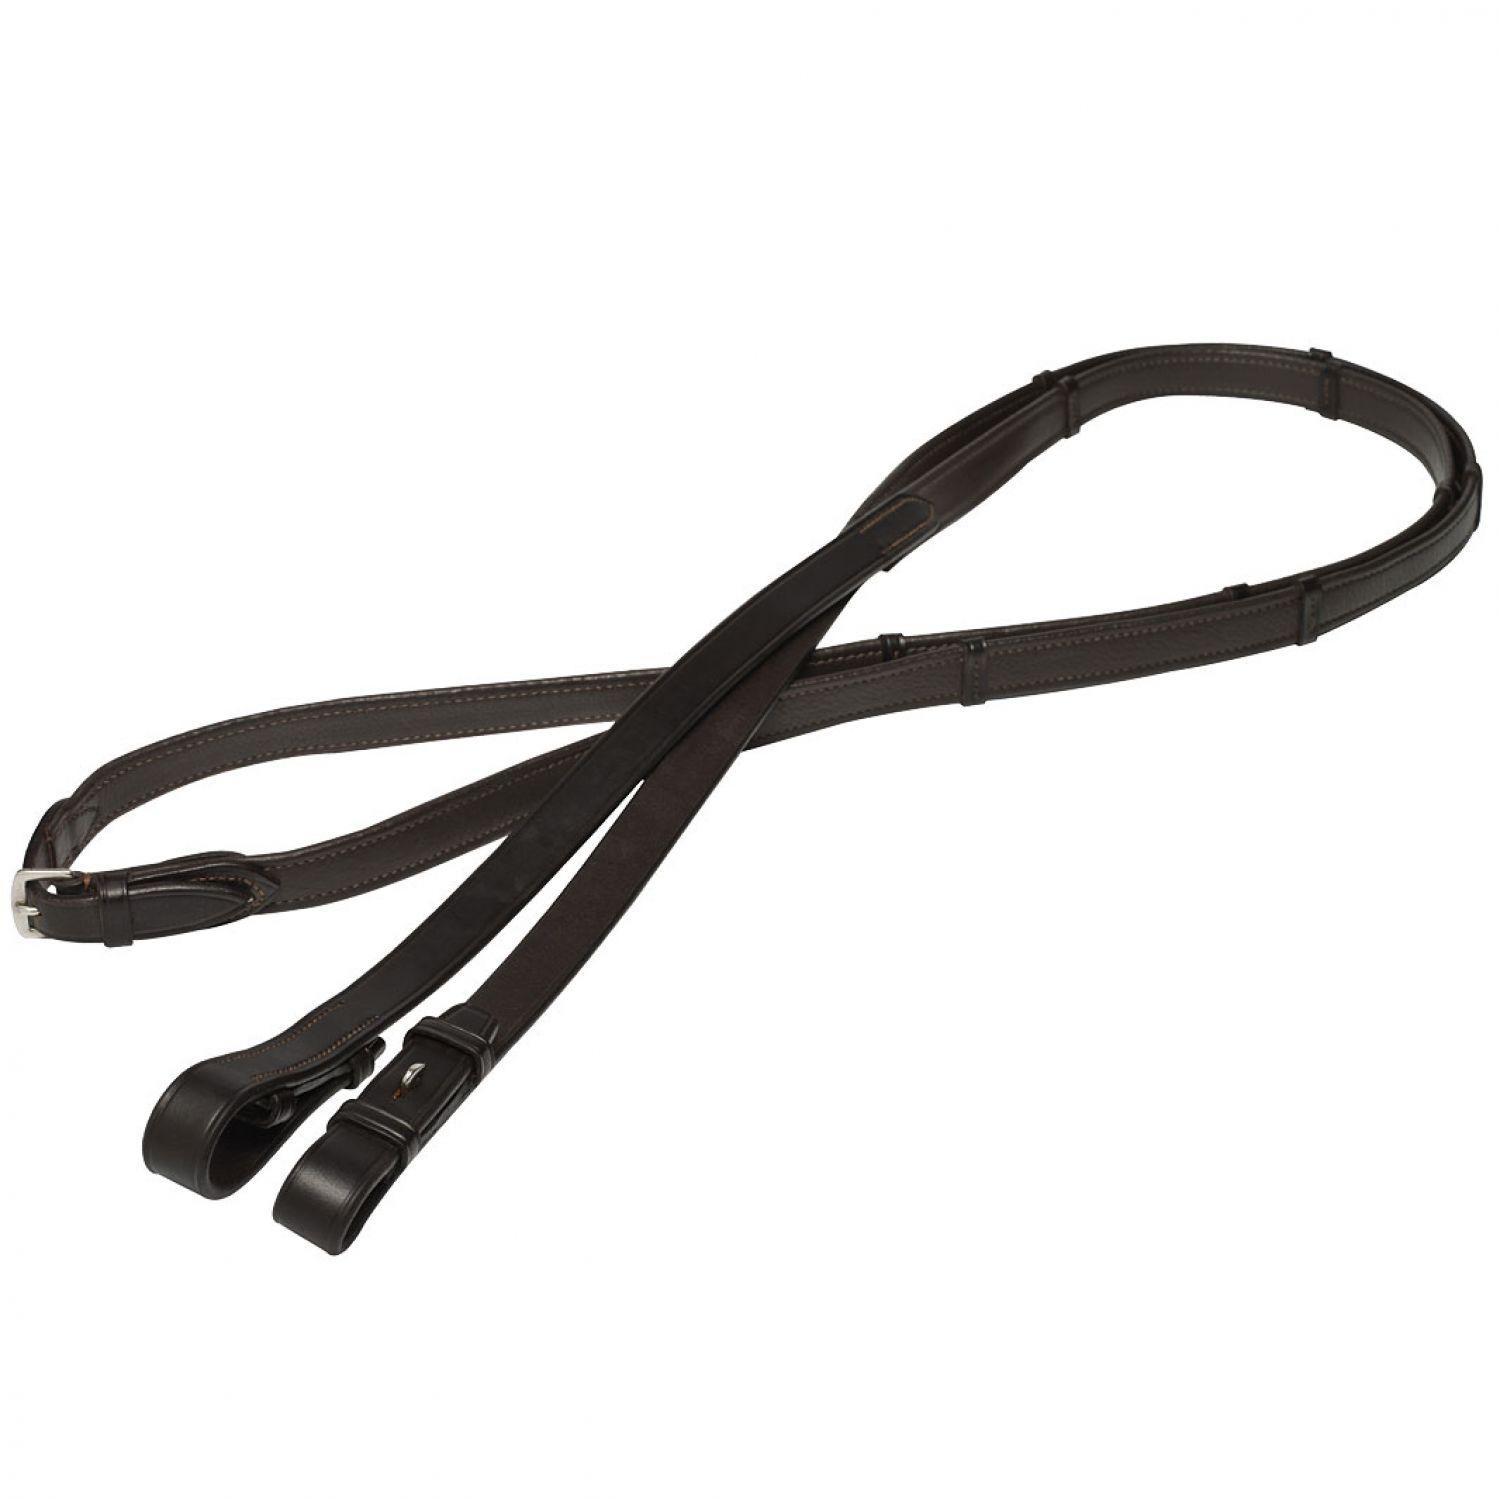 Ph Dressage Reins Childs Brown With Stops 3243